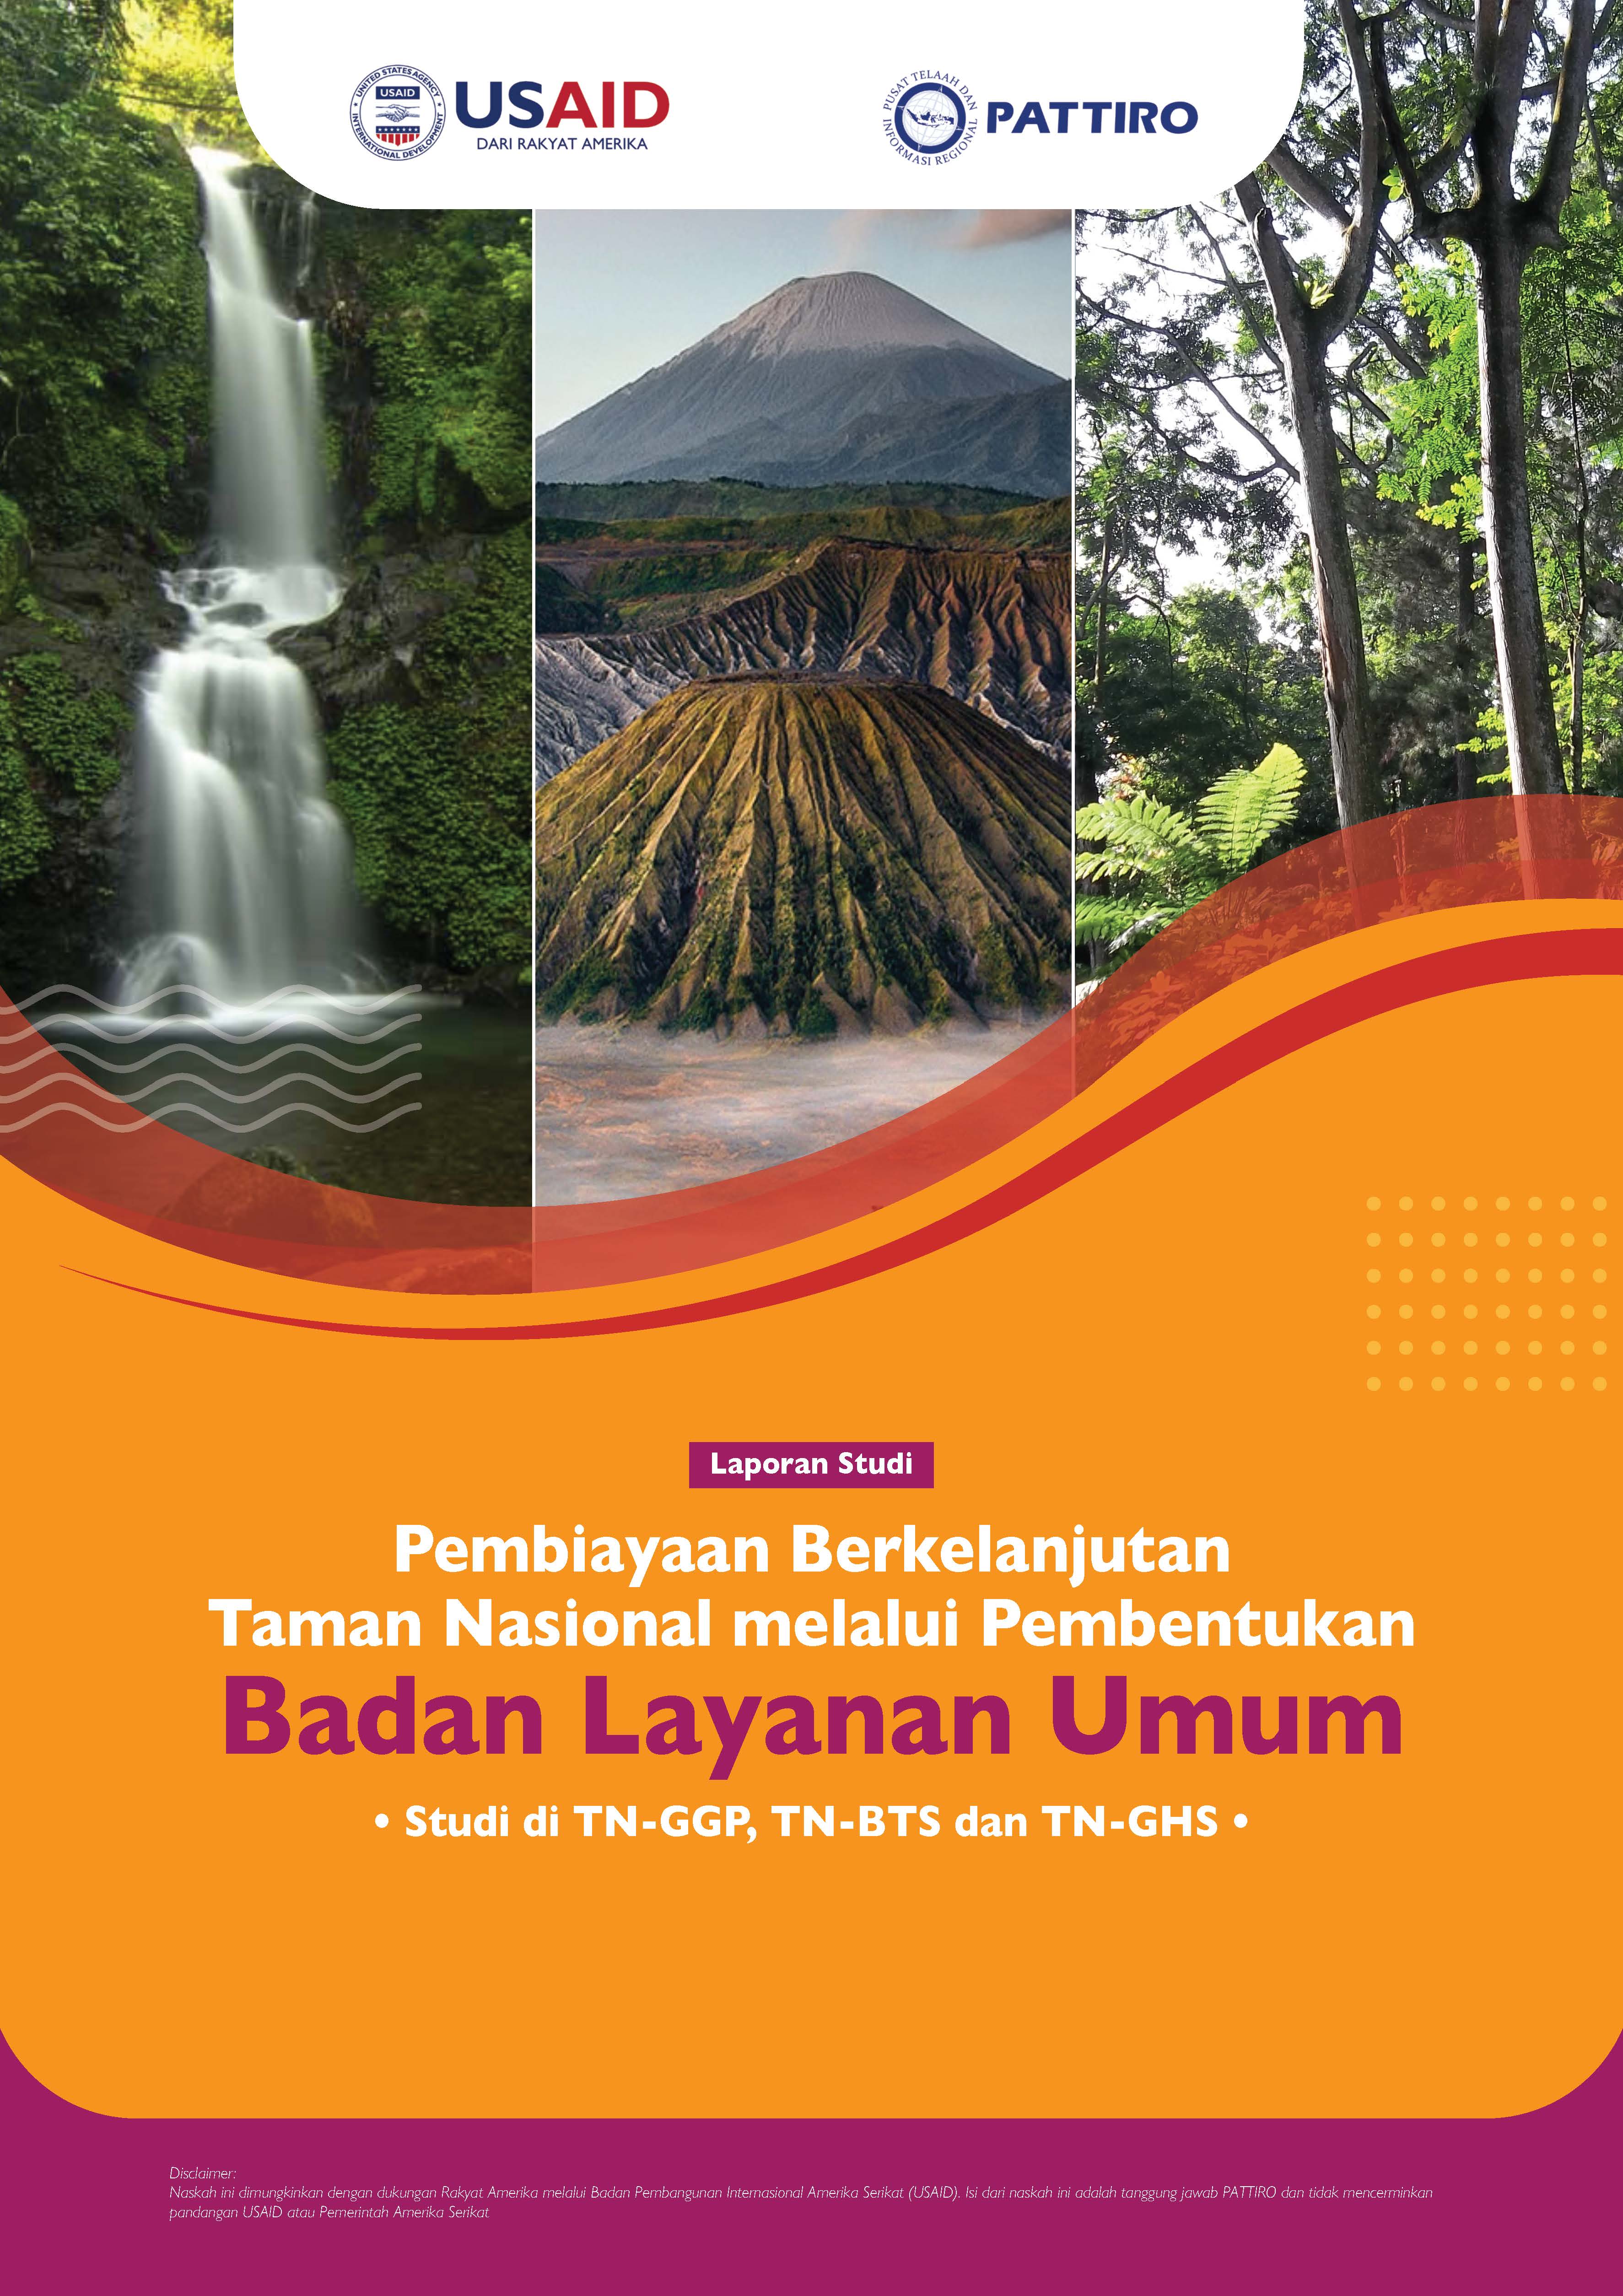 Research Report Studi | Sustainable Financing of National Parks through Establishment of Public Service Agencies